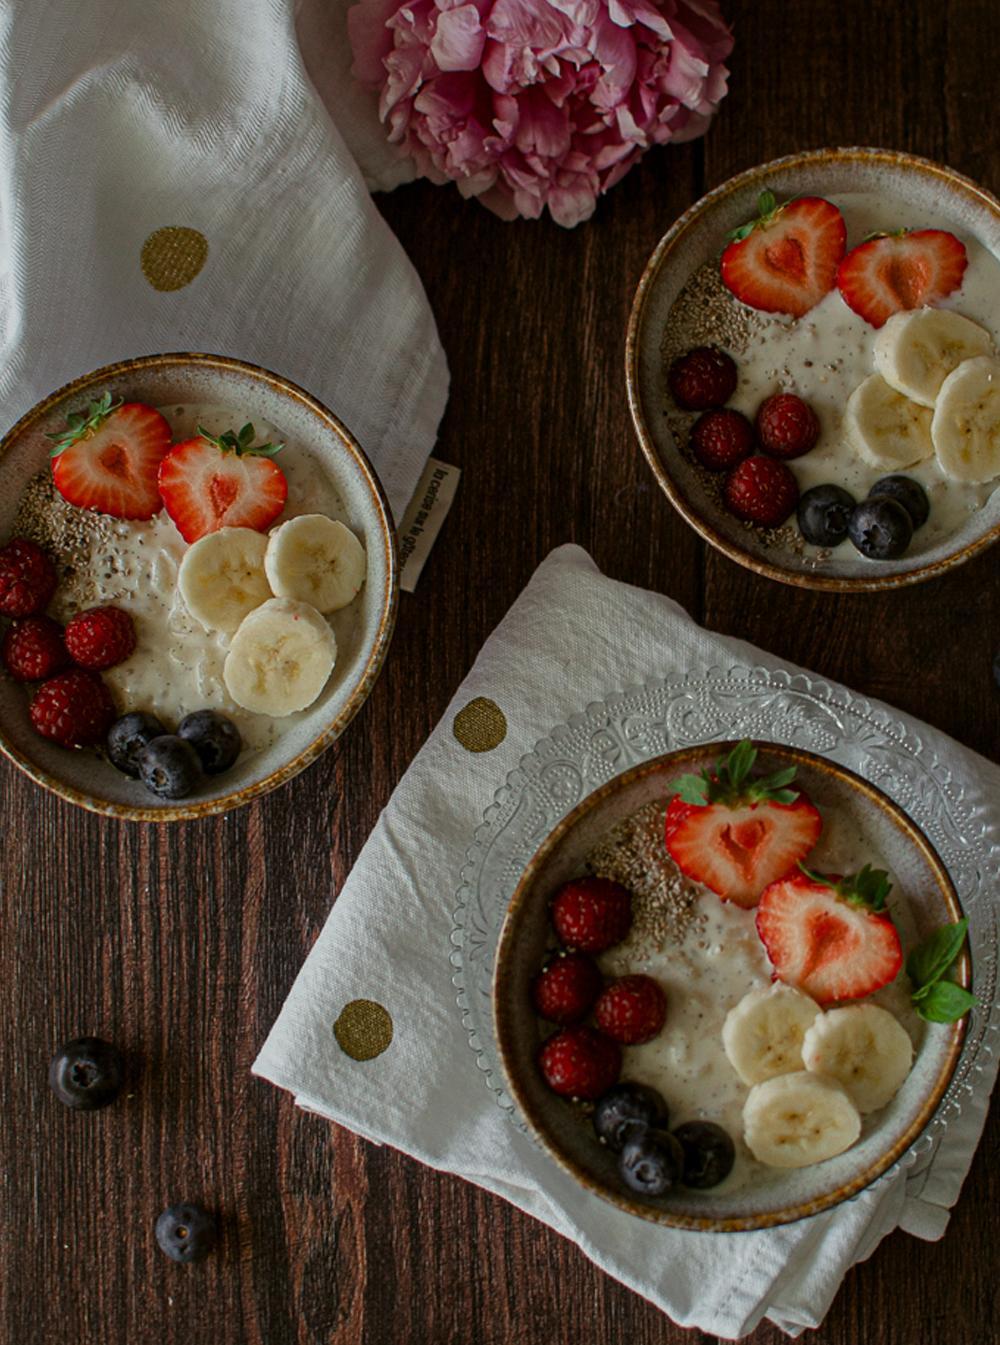 Rice pudding coconut milk and fresh fruits